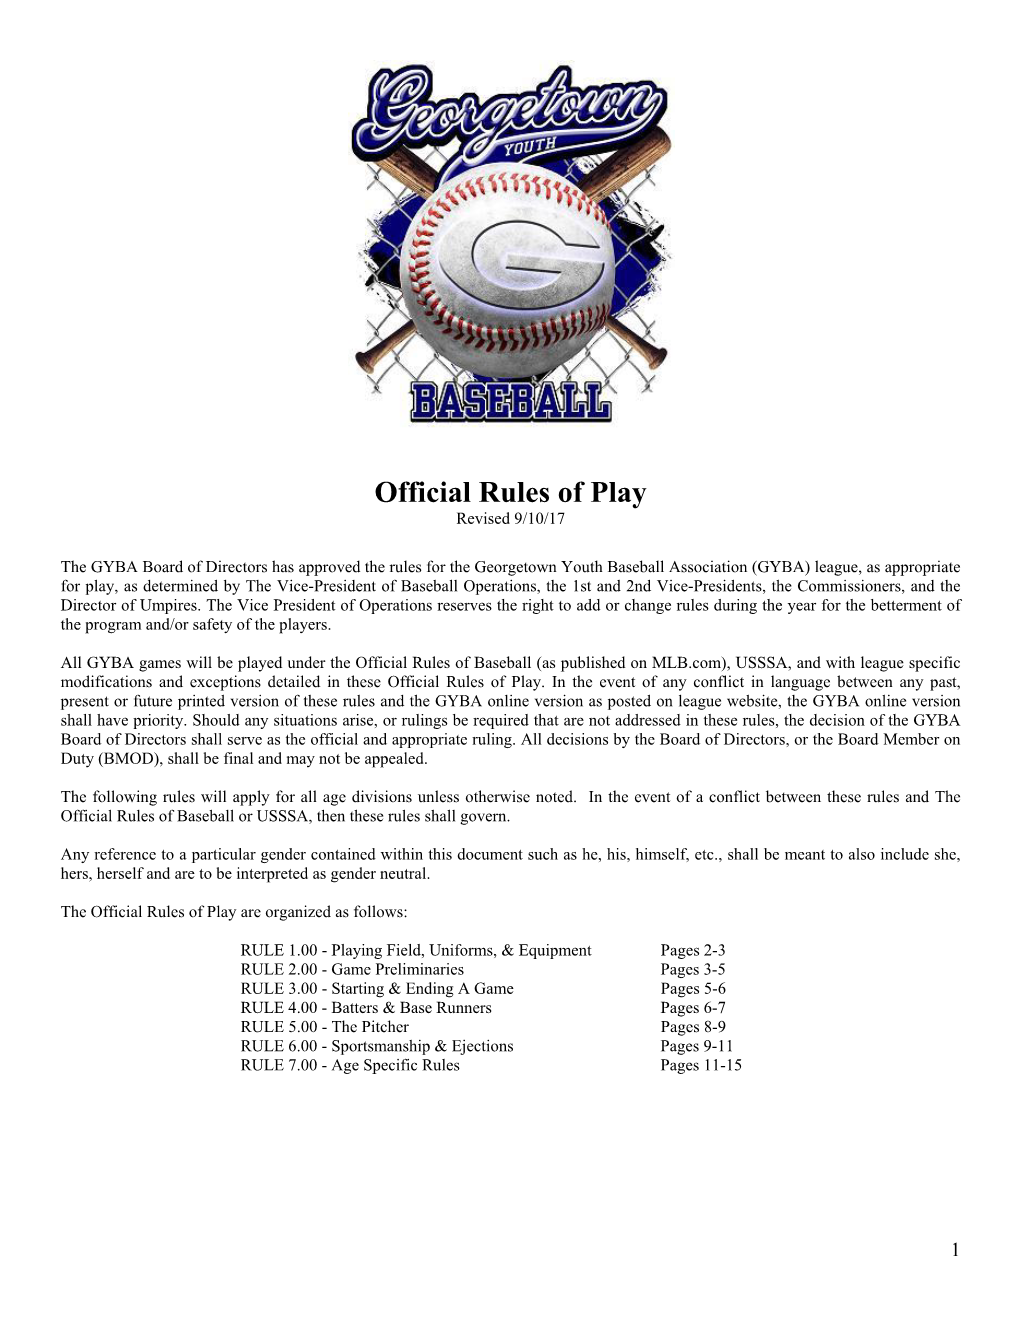 Official Rules of Play Revised 9/10/17